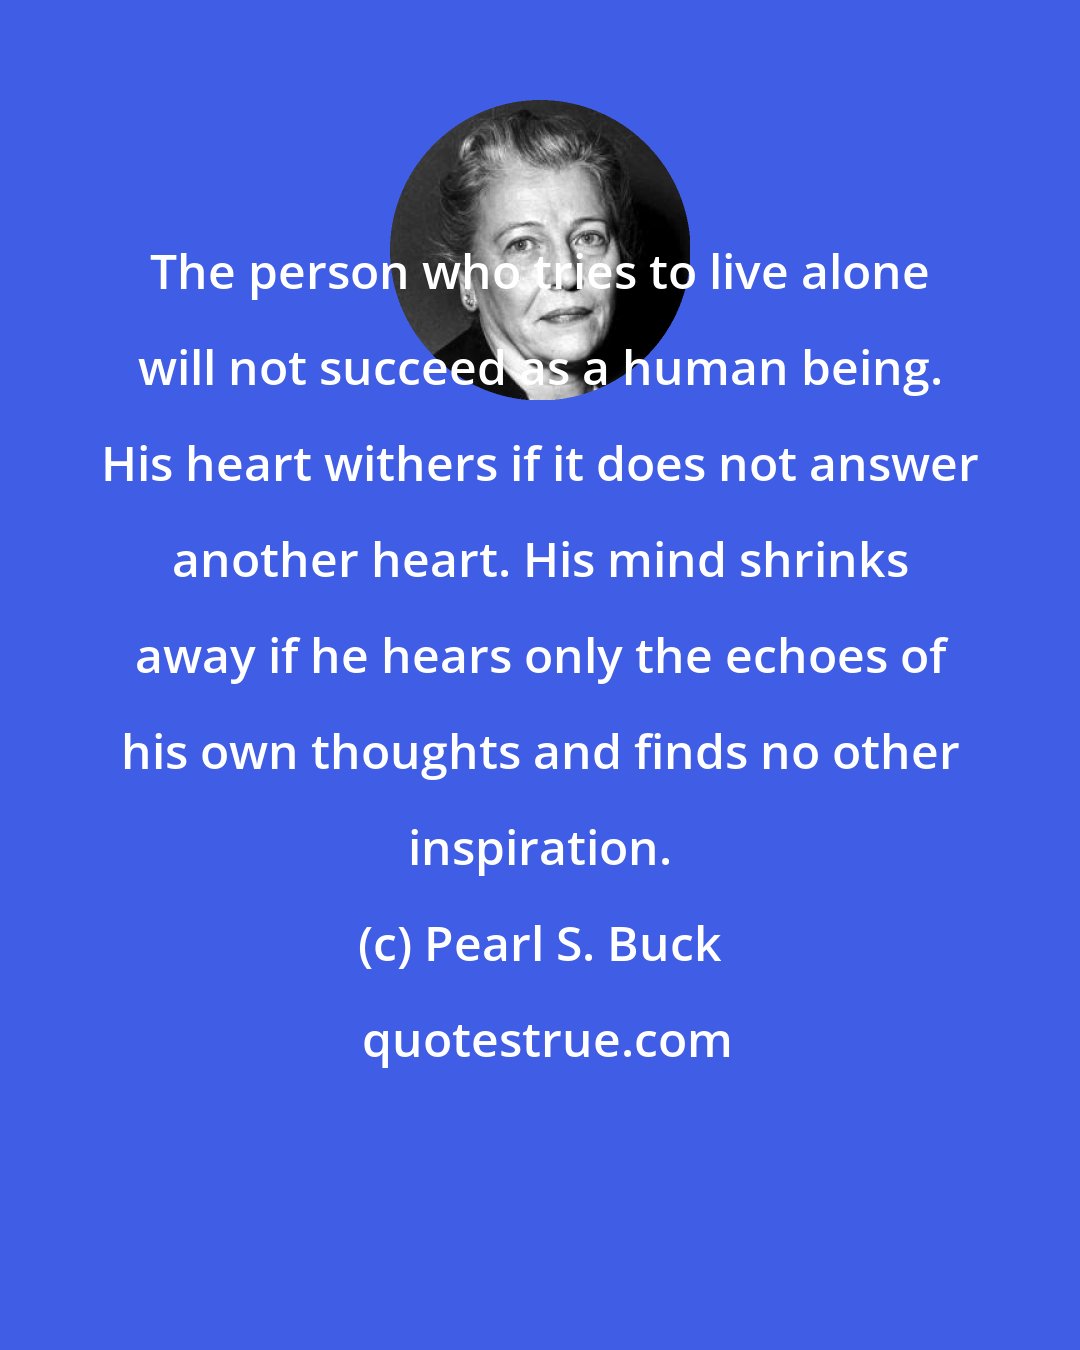 Pearl S. Buck: The person who tries to live alone will not succeed as a human being. His heart withers if it does not answer another heart. His mind shrinks away if he hears only the echoes of his own thoughts and finds no other inspiration.